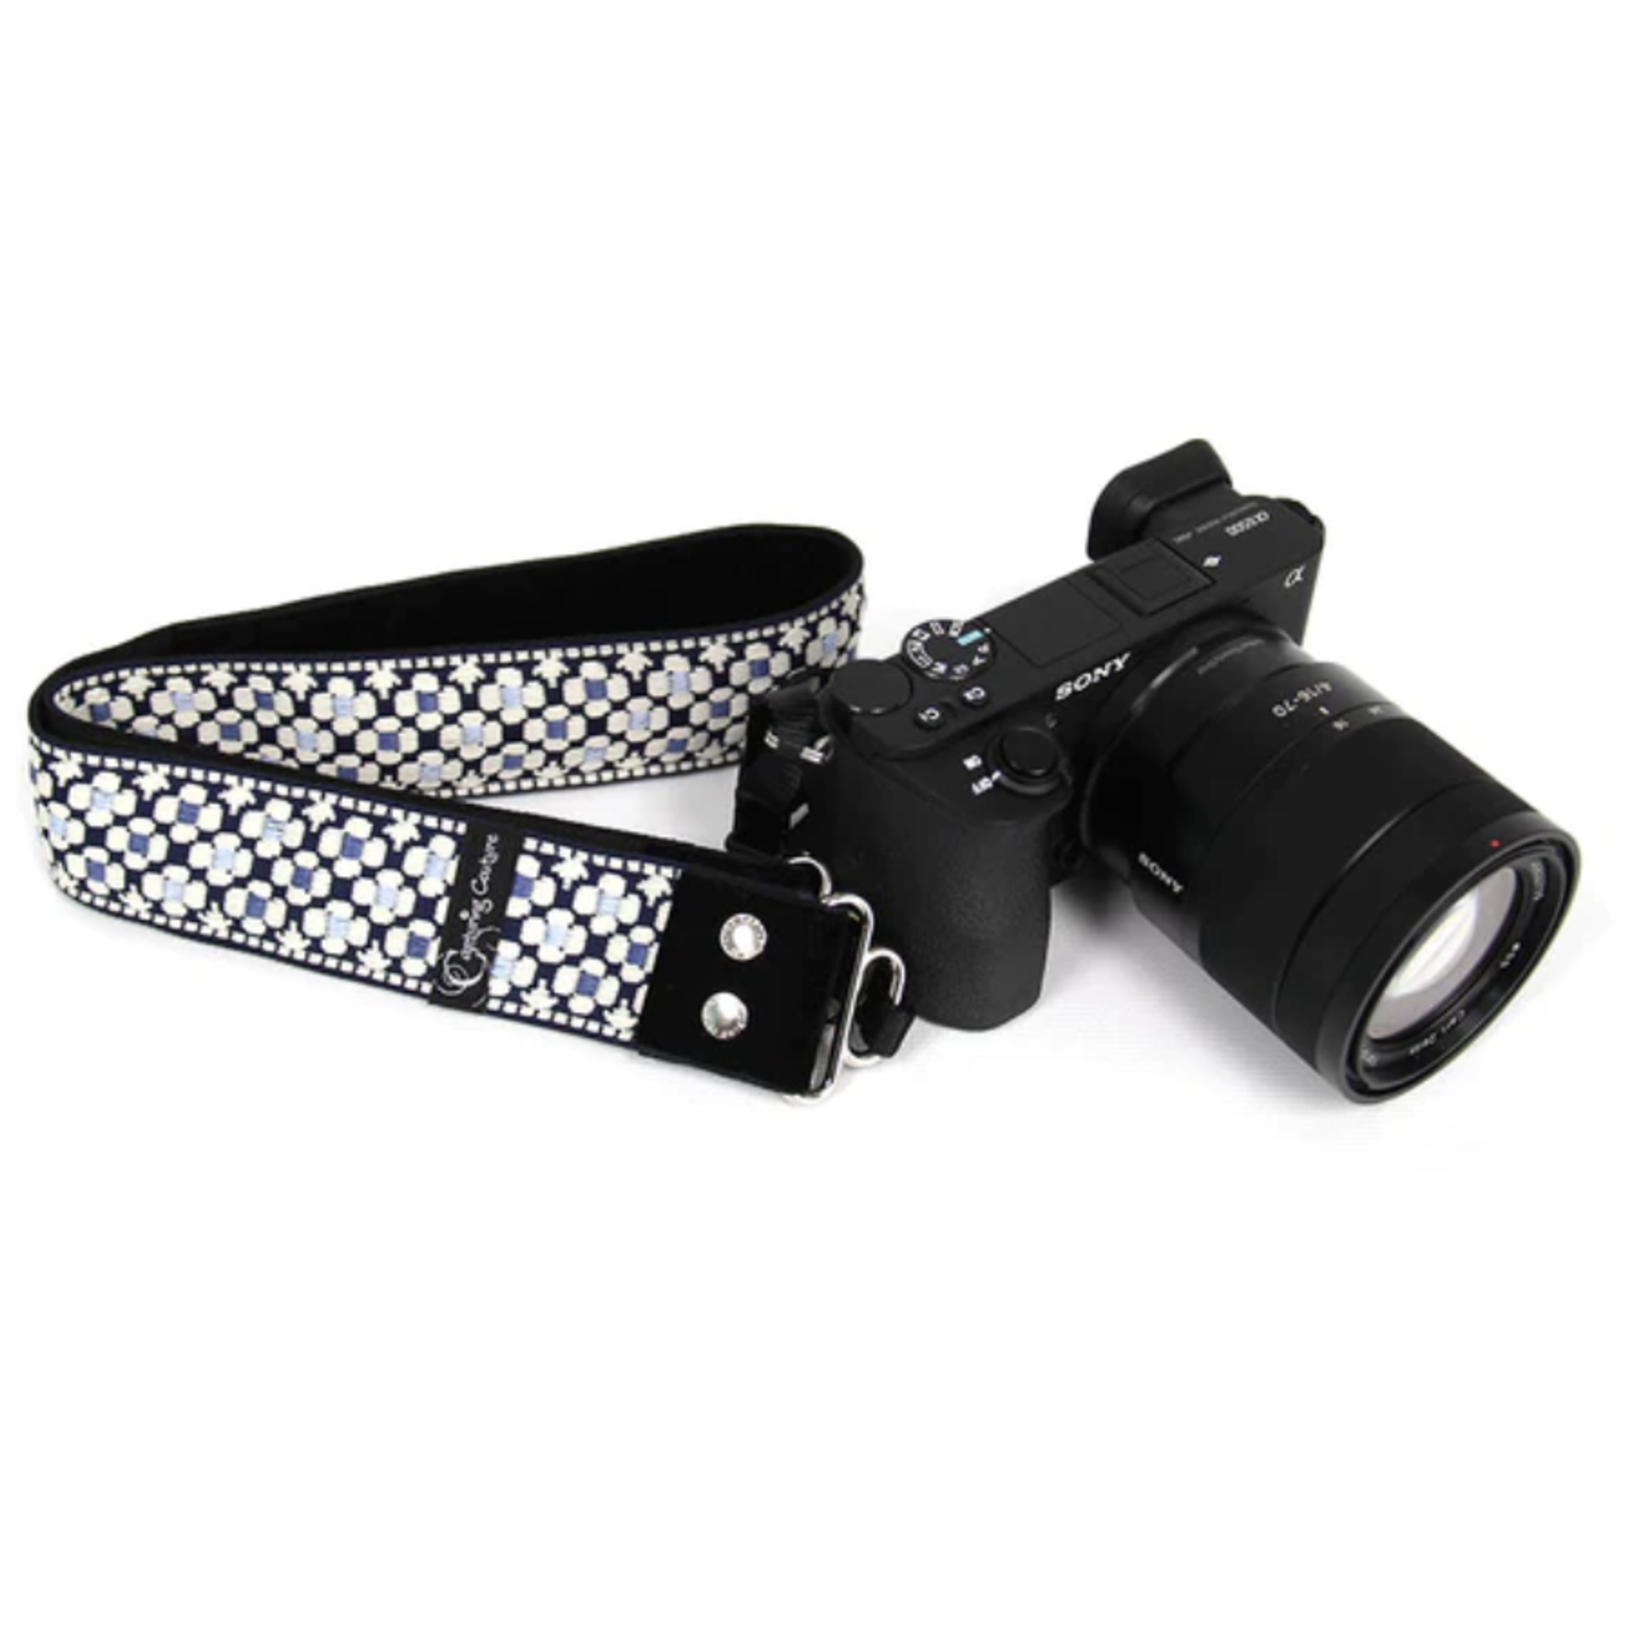 Capturing Couture Capturing Couture 1.5" Camera Strap - Daisy Dot Blue